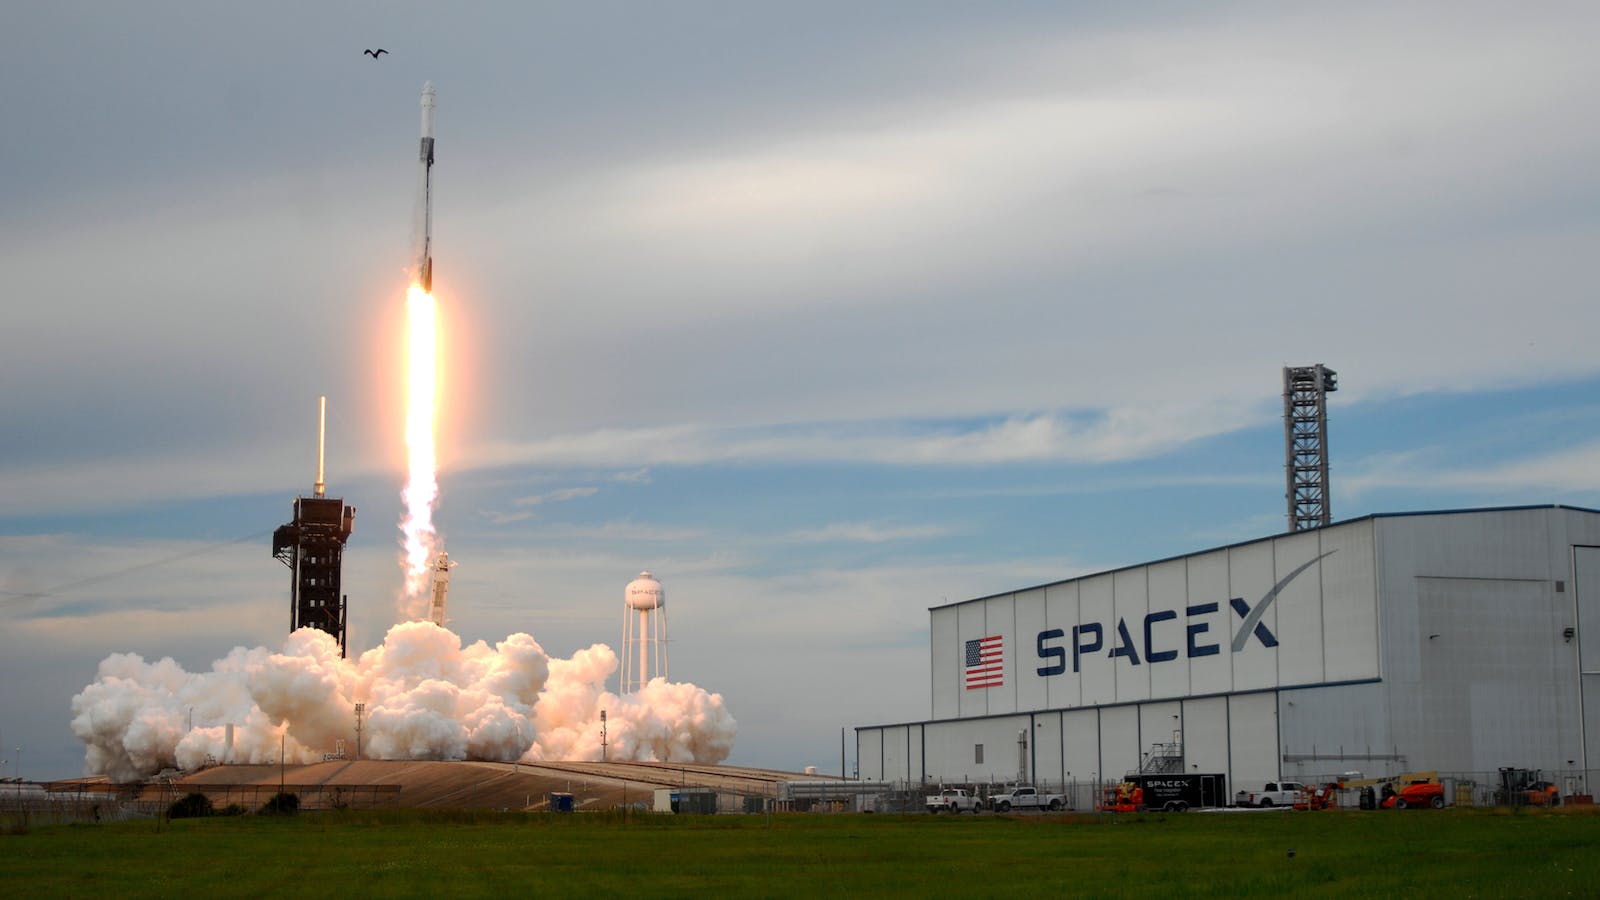 New SpaceX Launch To Boost European Navigation Satellites As EU Launchers Face Delays